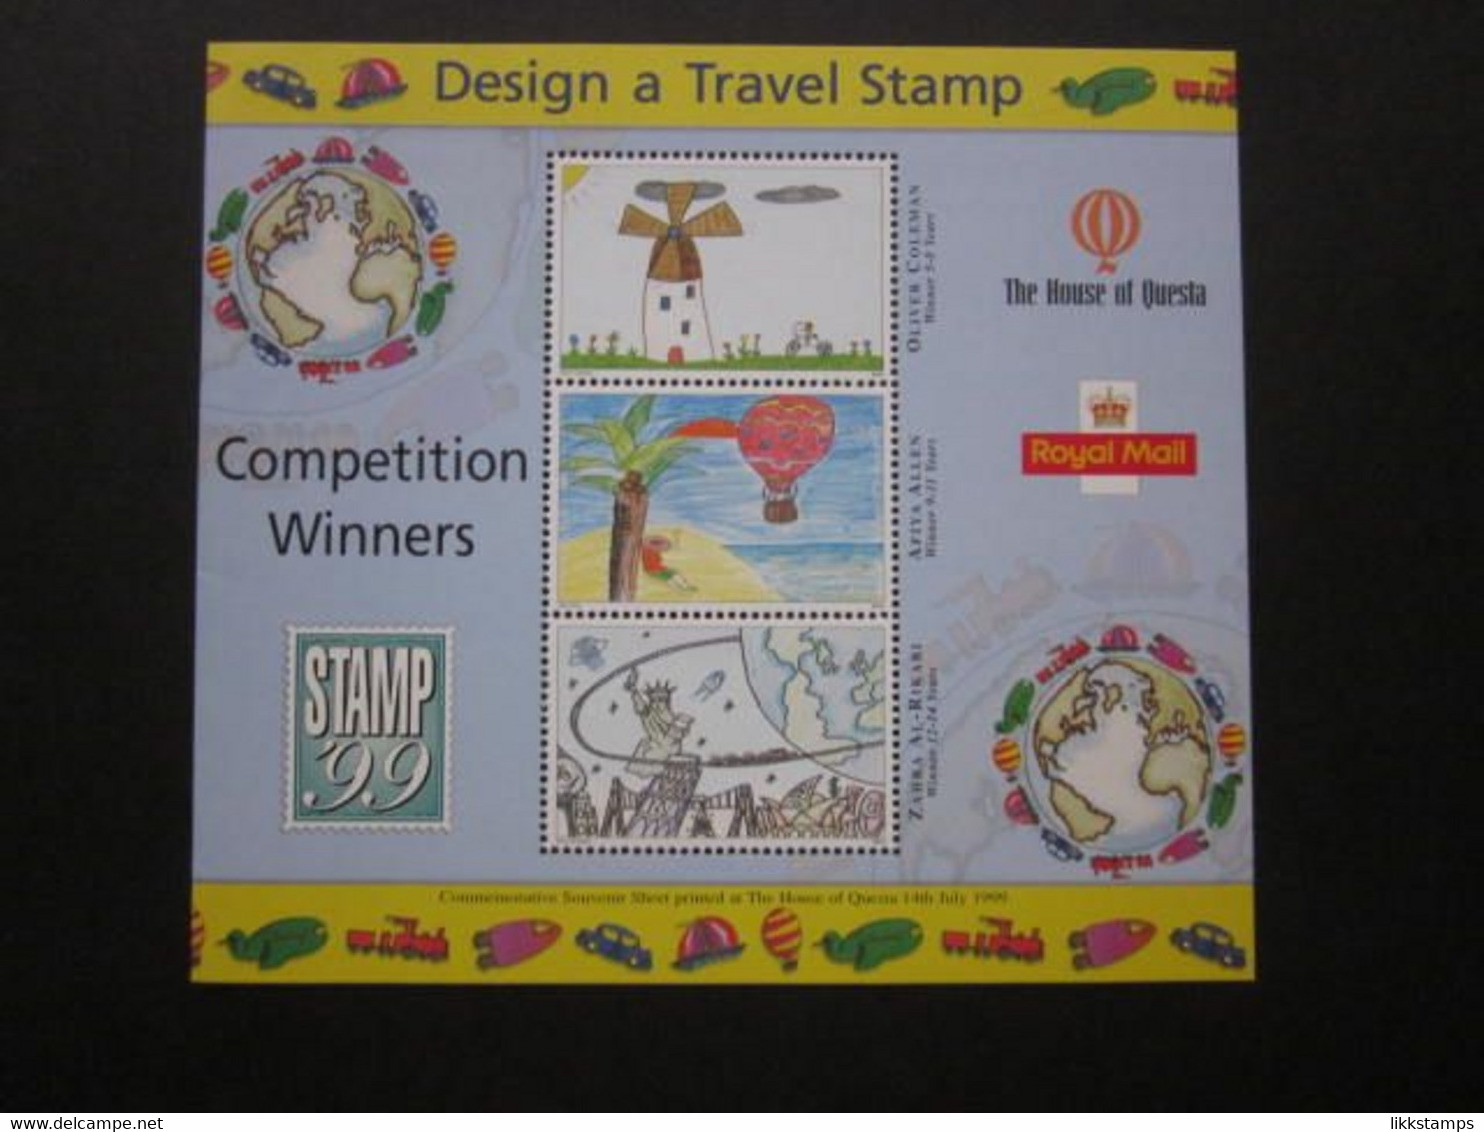 1999 THE ROYAL MAIL/THE HOUSE OF QUESTA DESIGN A TRAVEL STAMP COMPETITION SOUVENIR SHEET. ( 02095 ) - Cinderelas